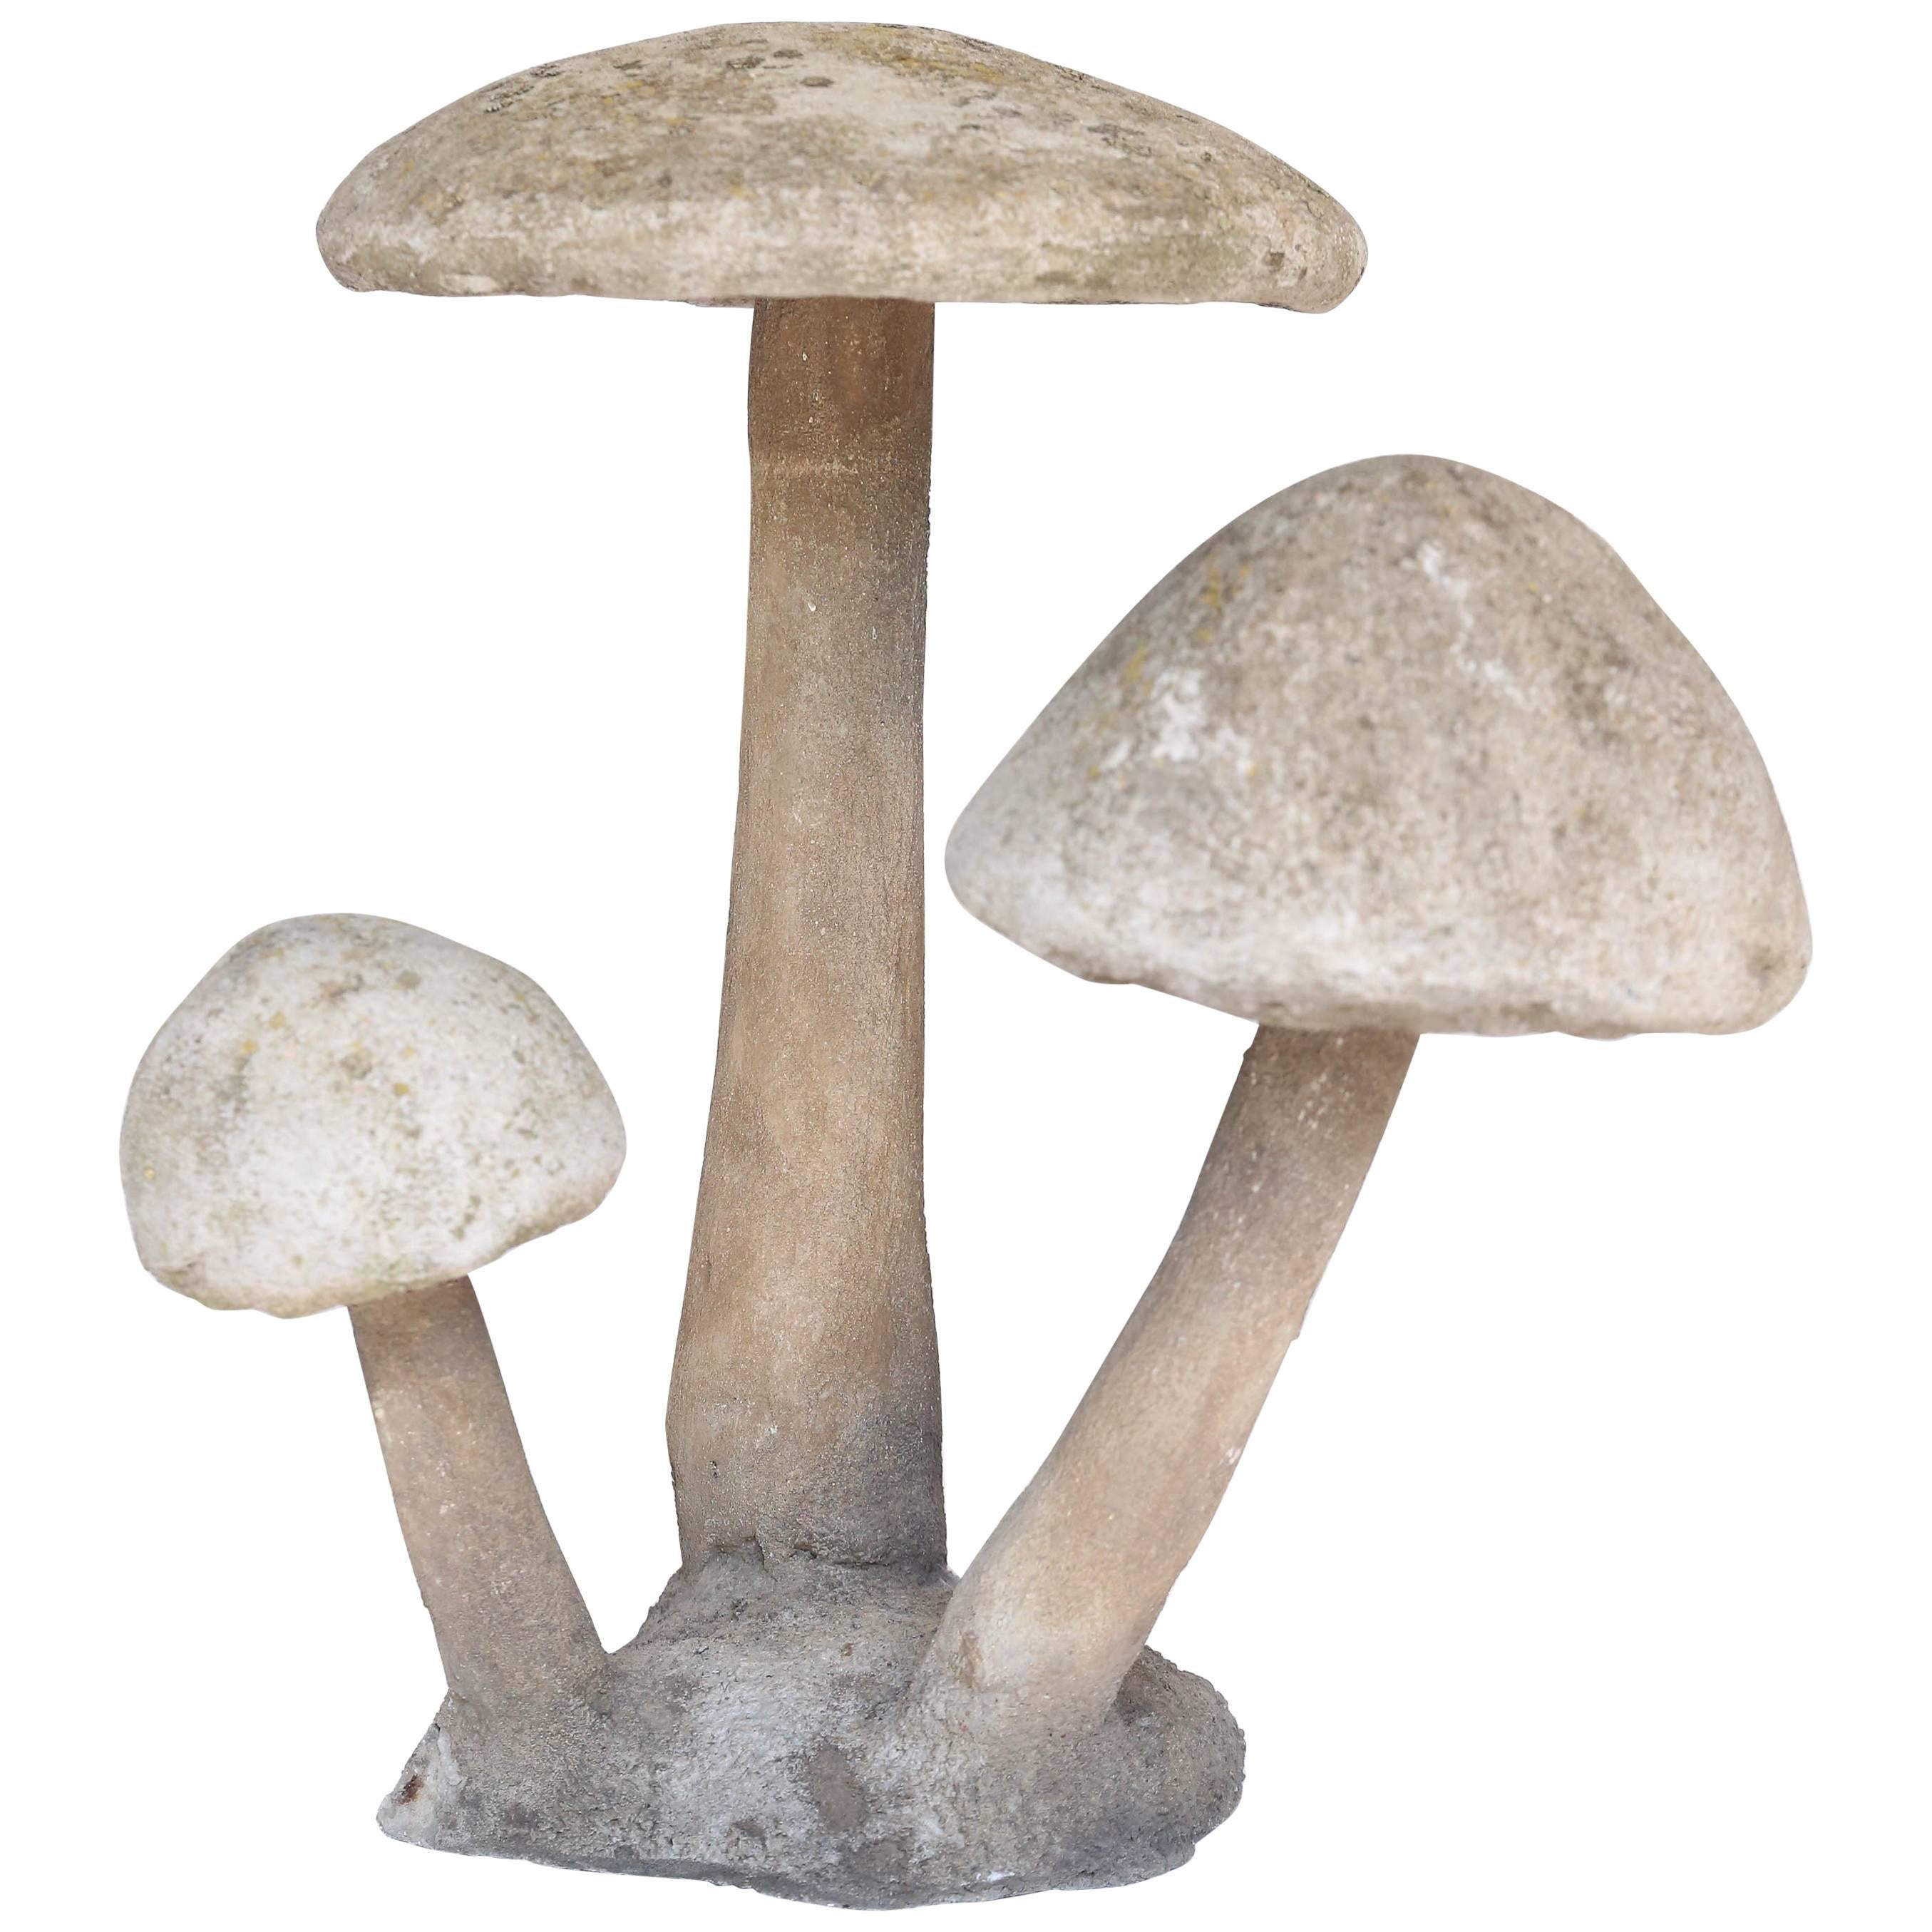 French Concrete Mushrooms Garden Element Group of Three